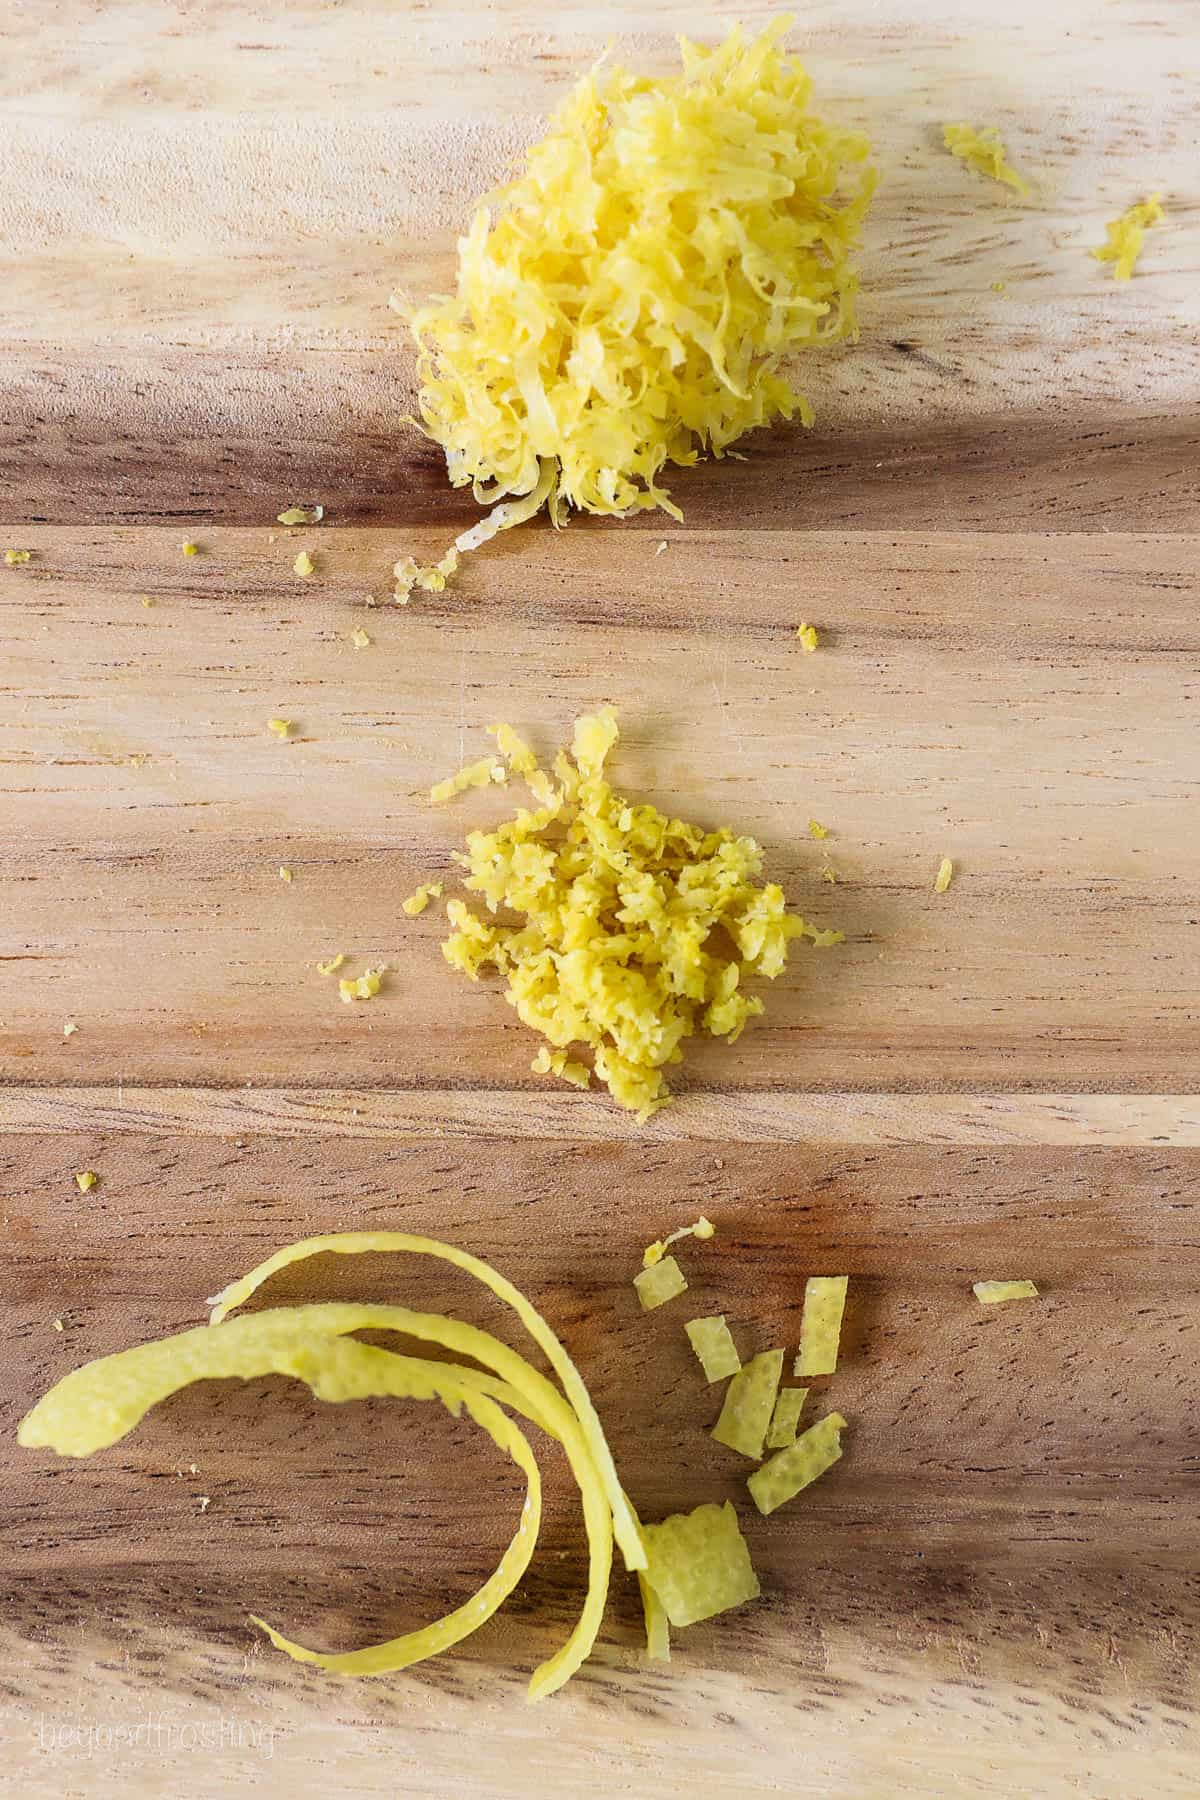 Lemon zest in three different sizes and textures